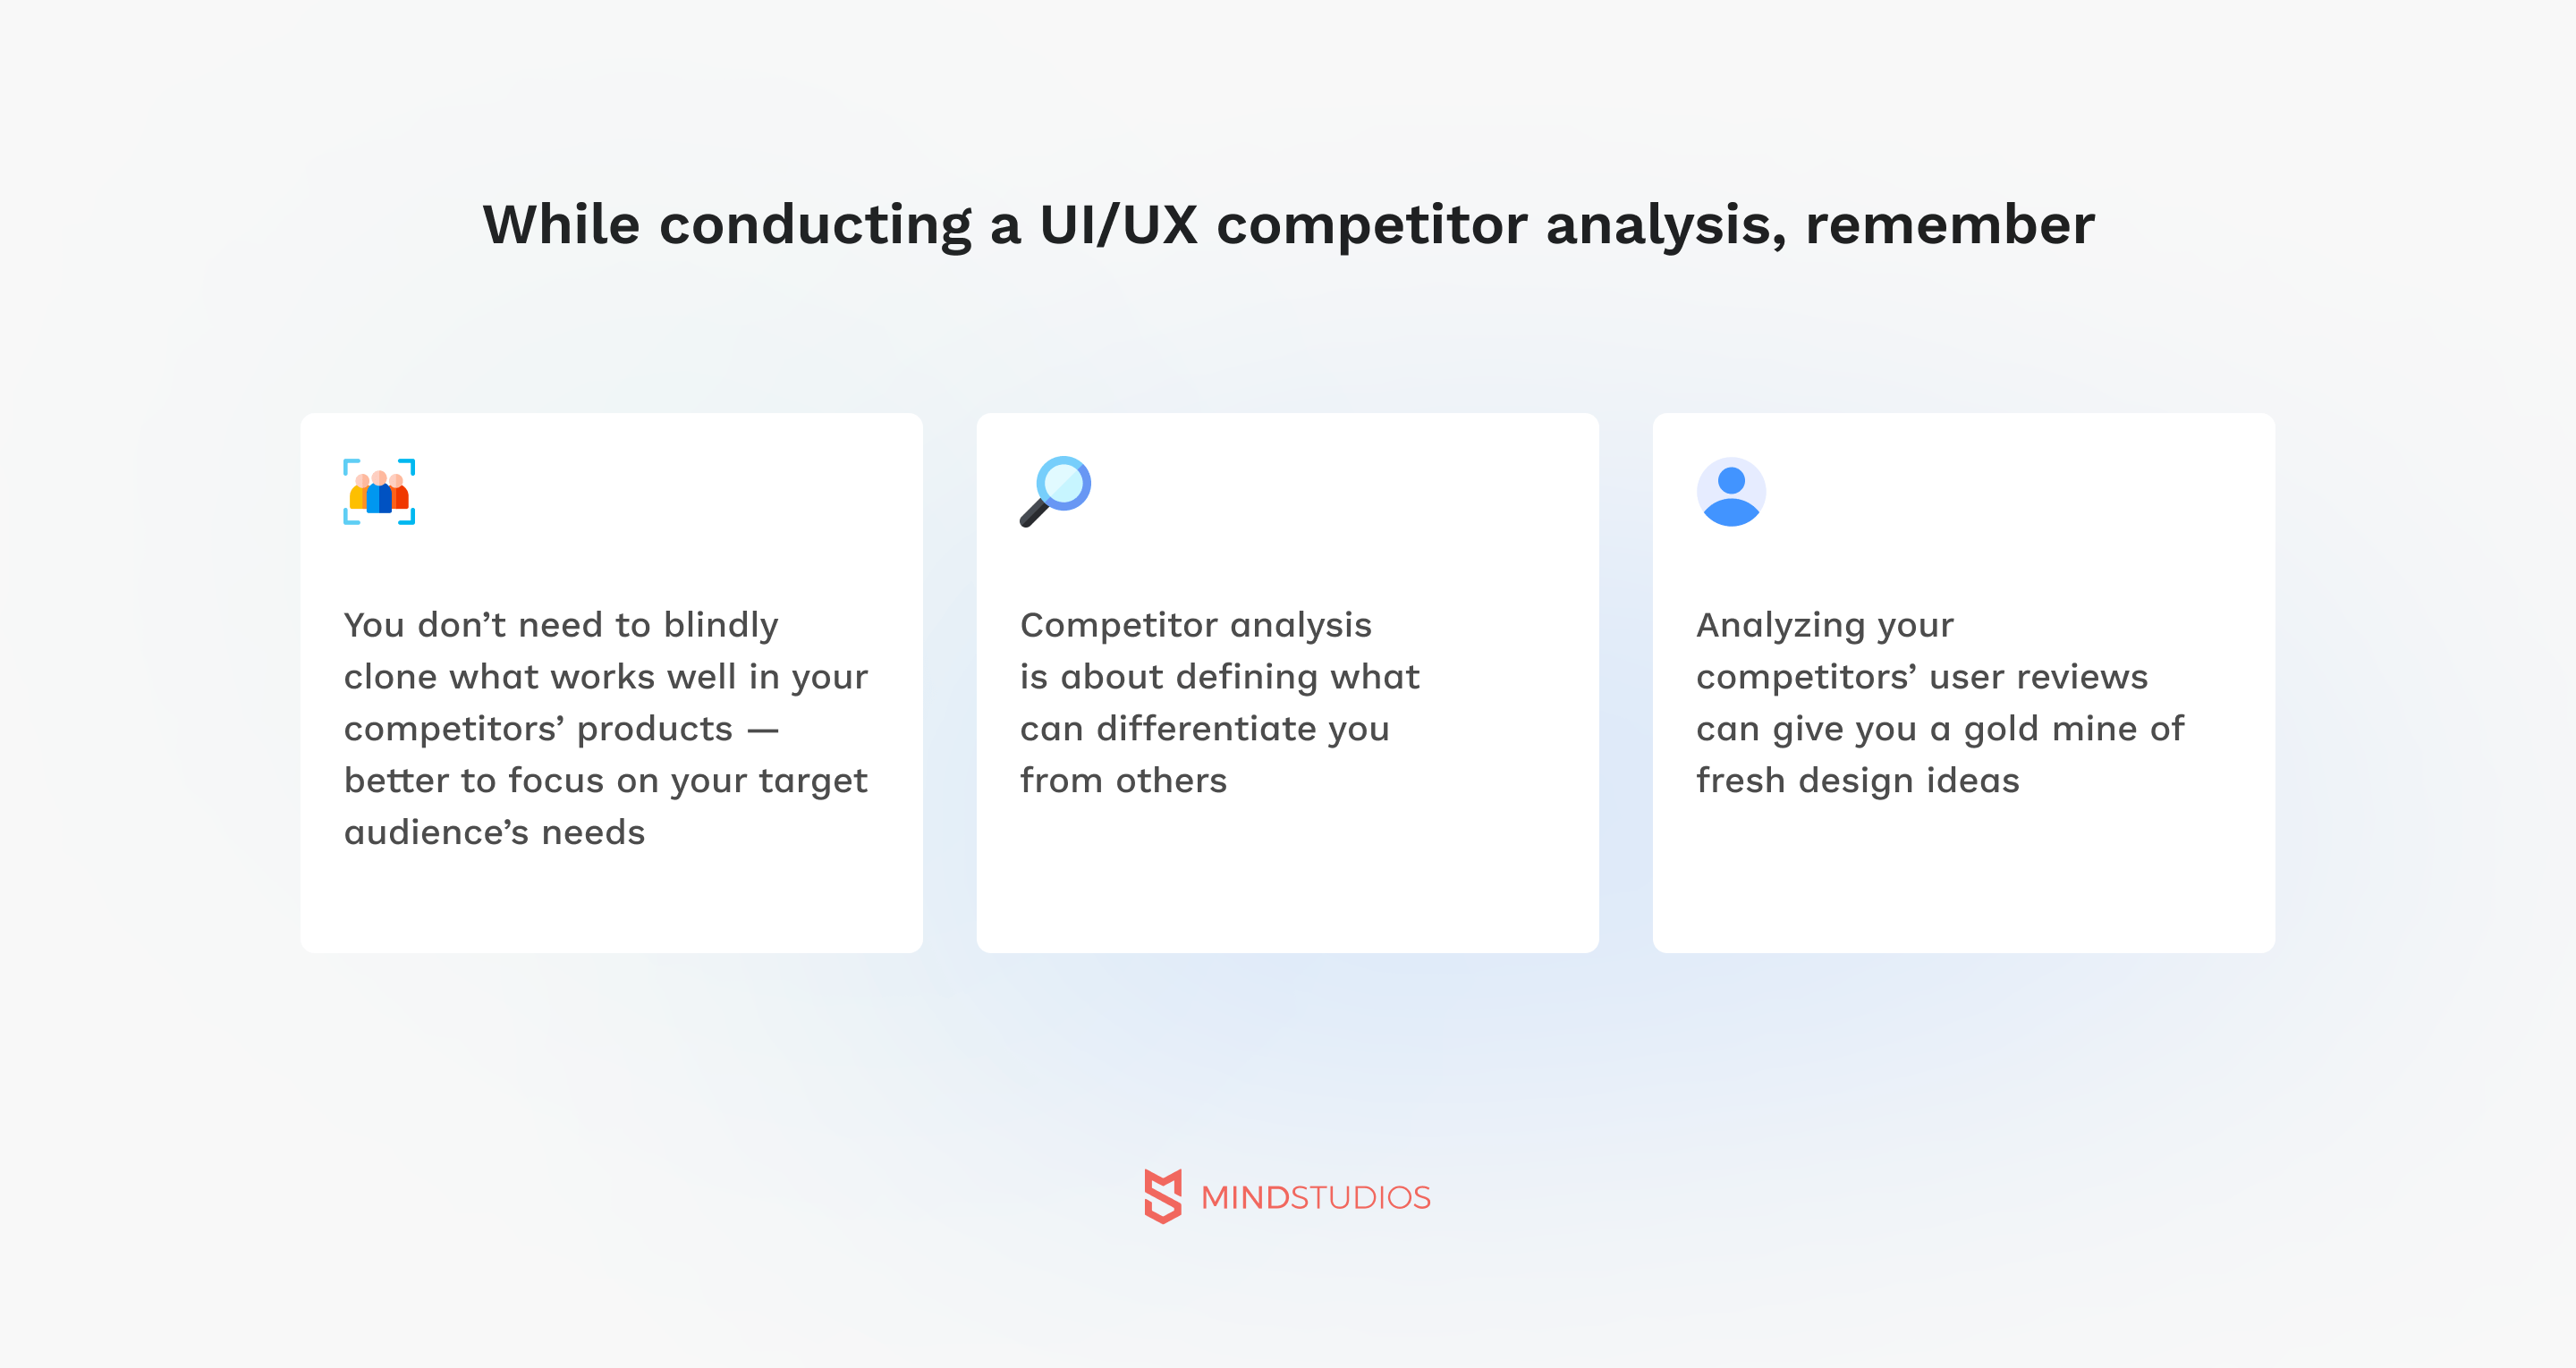 conducting a UI/UX competitor analysis